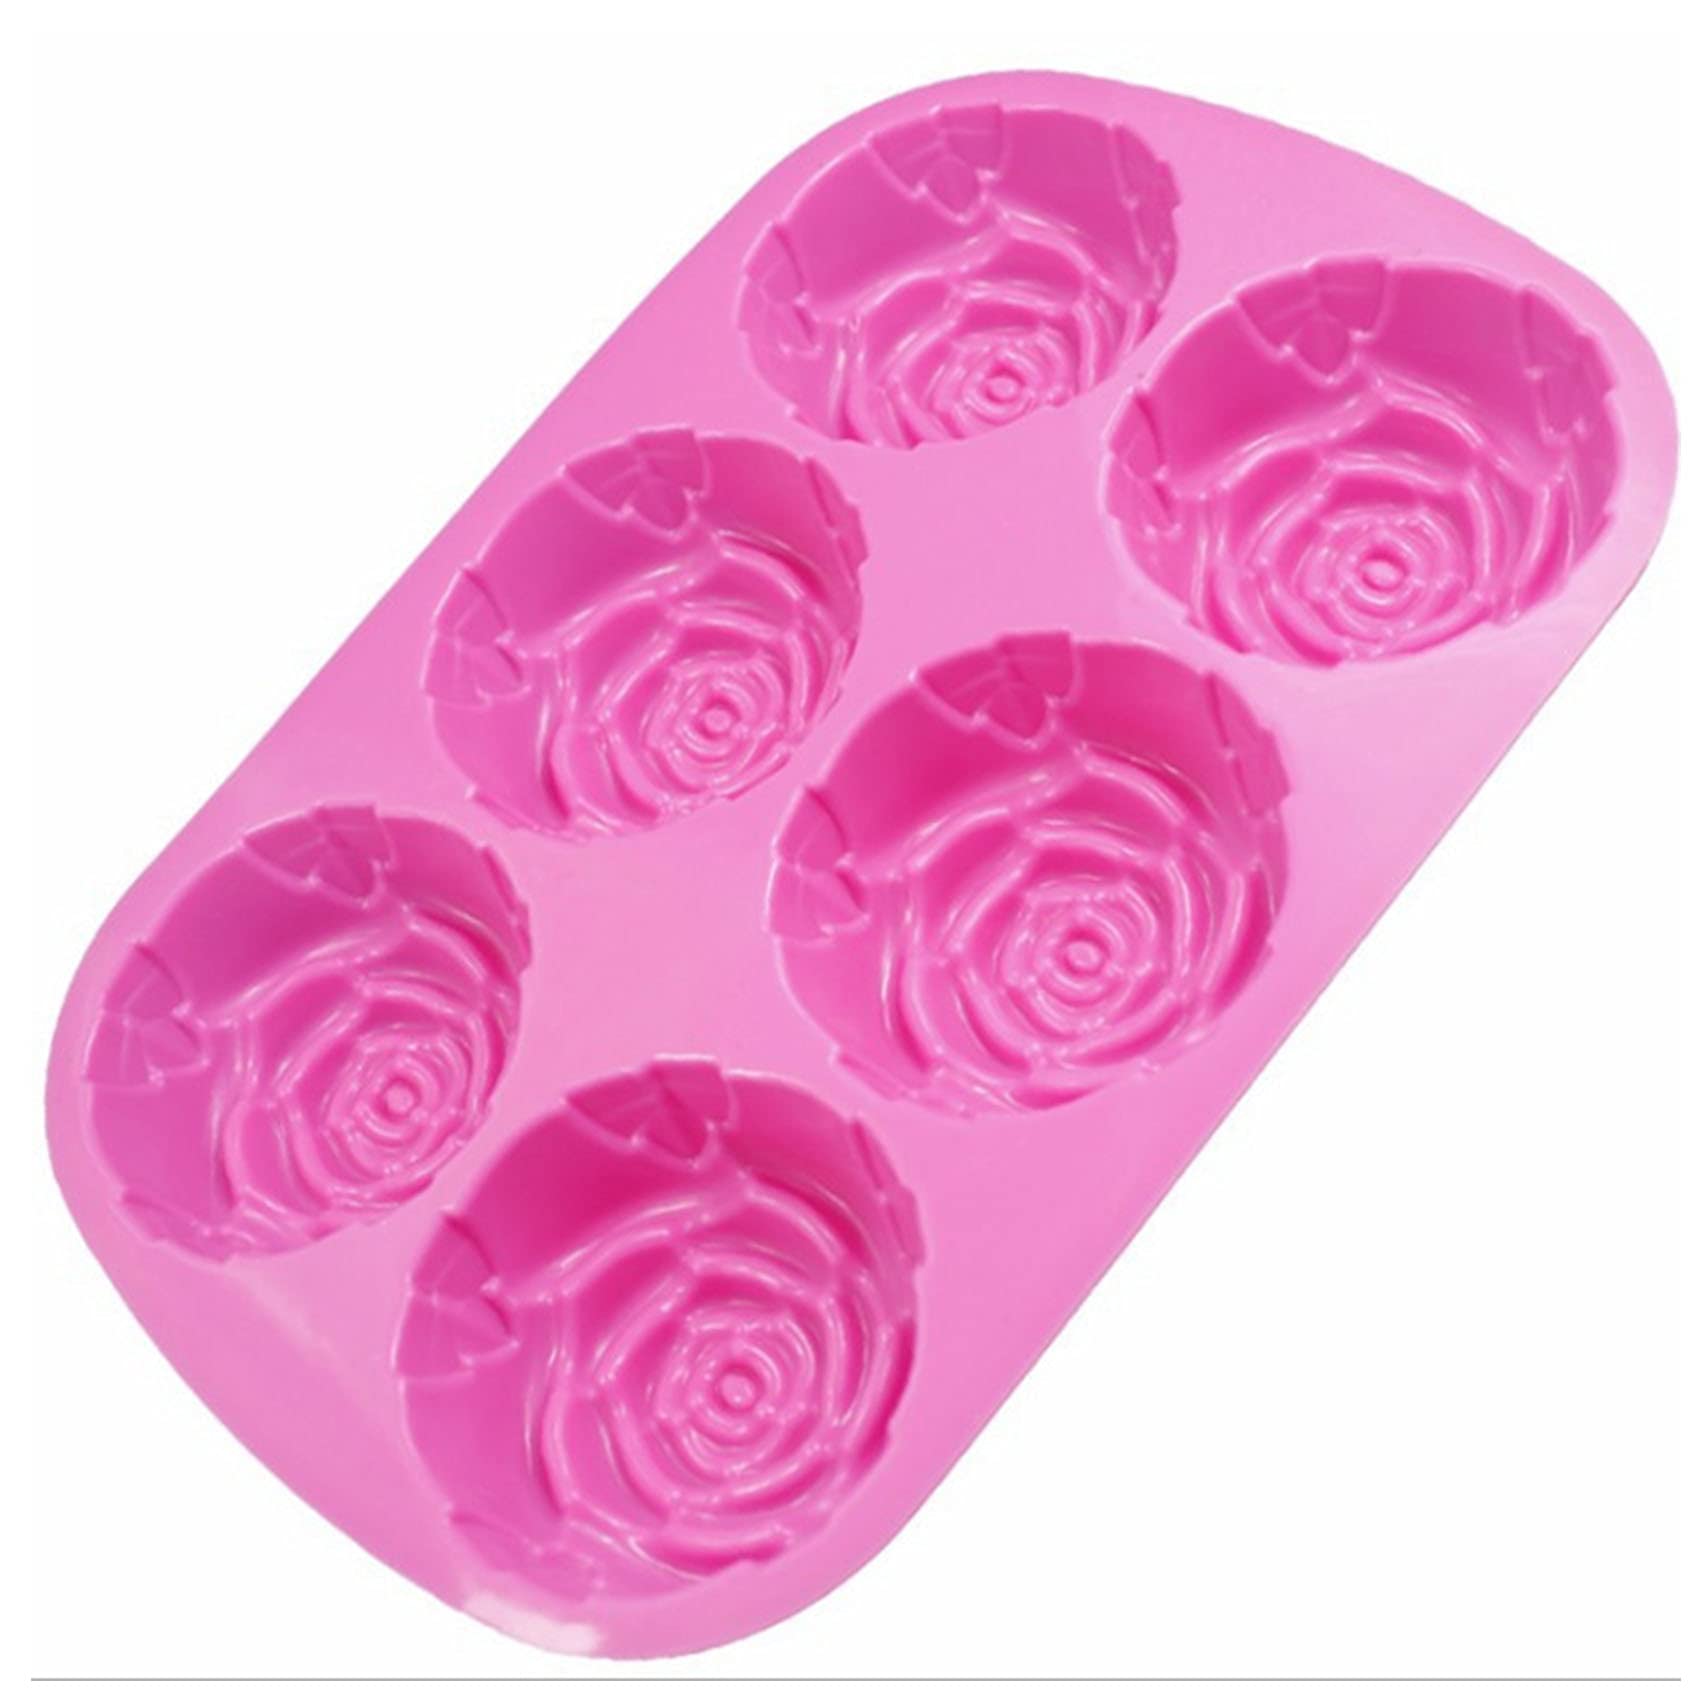 Thaoya Silicone Rose Flower Shape Molds For Homemade Chocolate Cupcake, ​Soap, Bread, ​Cornbread, Bundt Cake, Muffin, Pudding Set of 2 (Rose) (Rose)